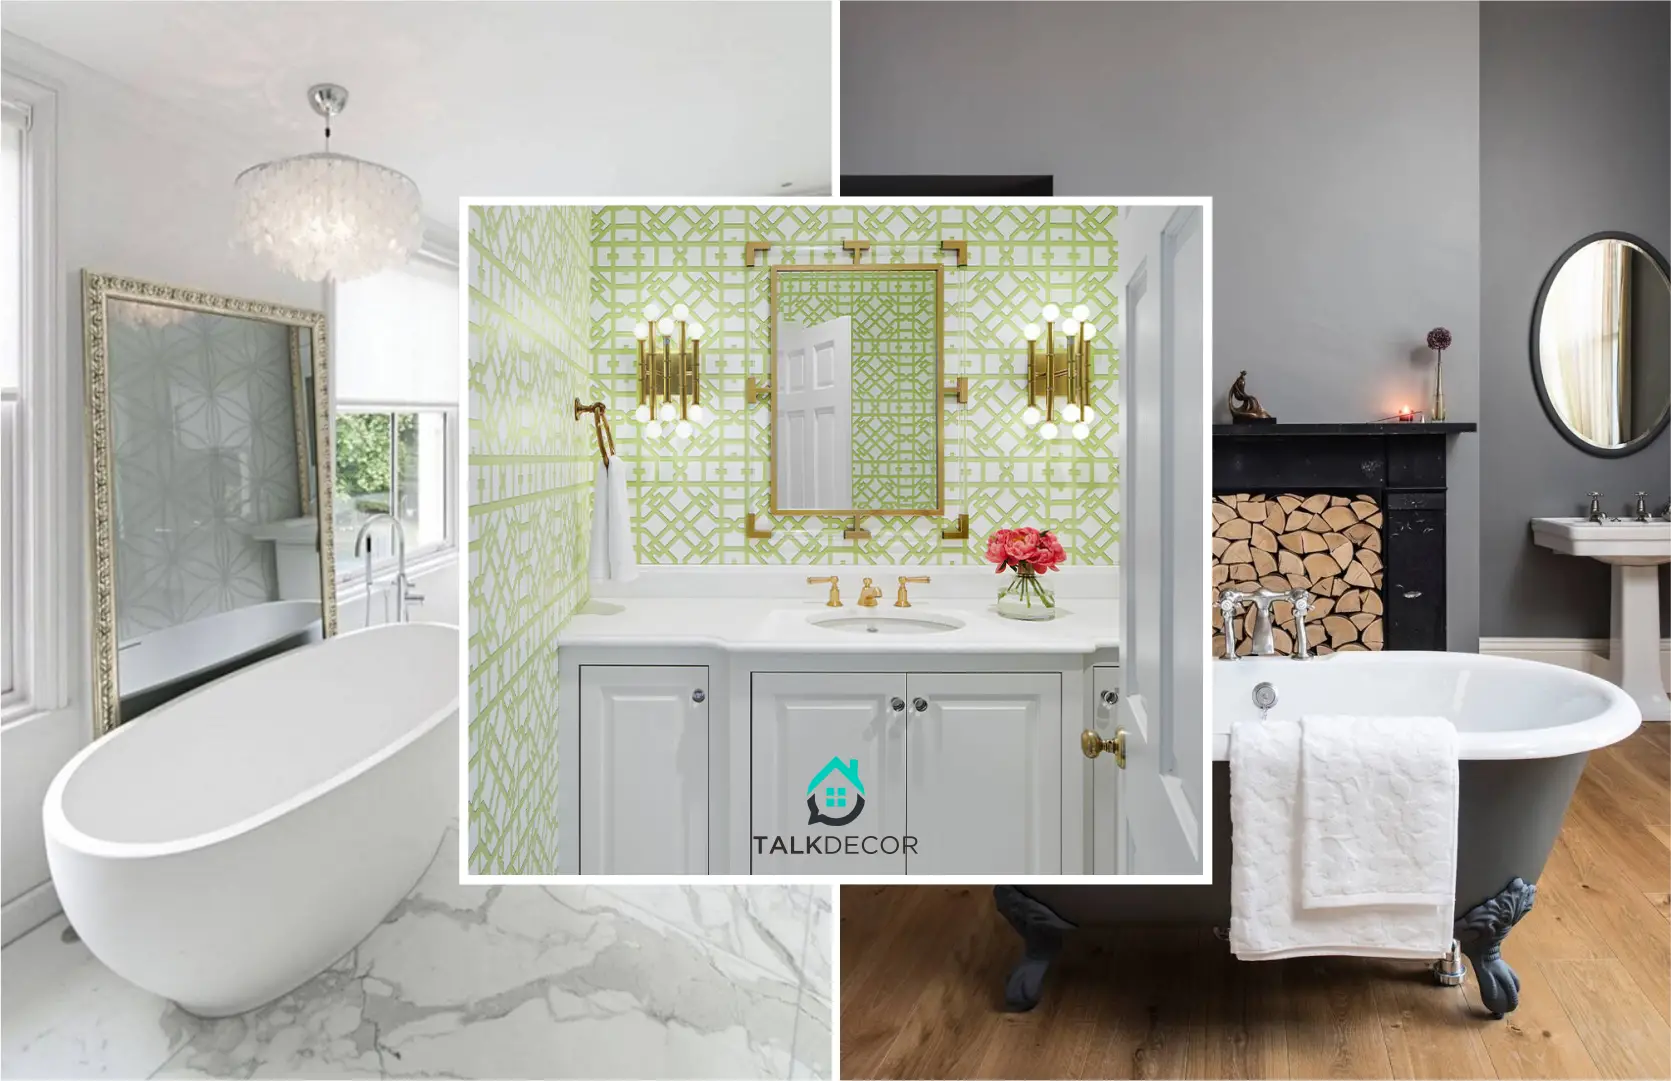 Consider Bathroom Remodel Project with These 15 Ideas